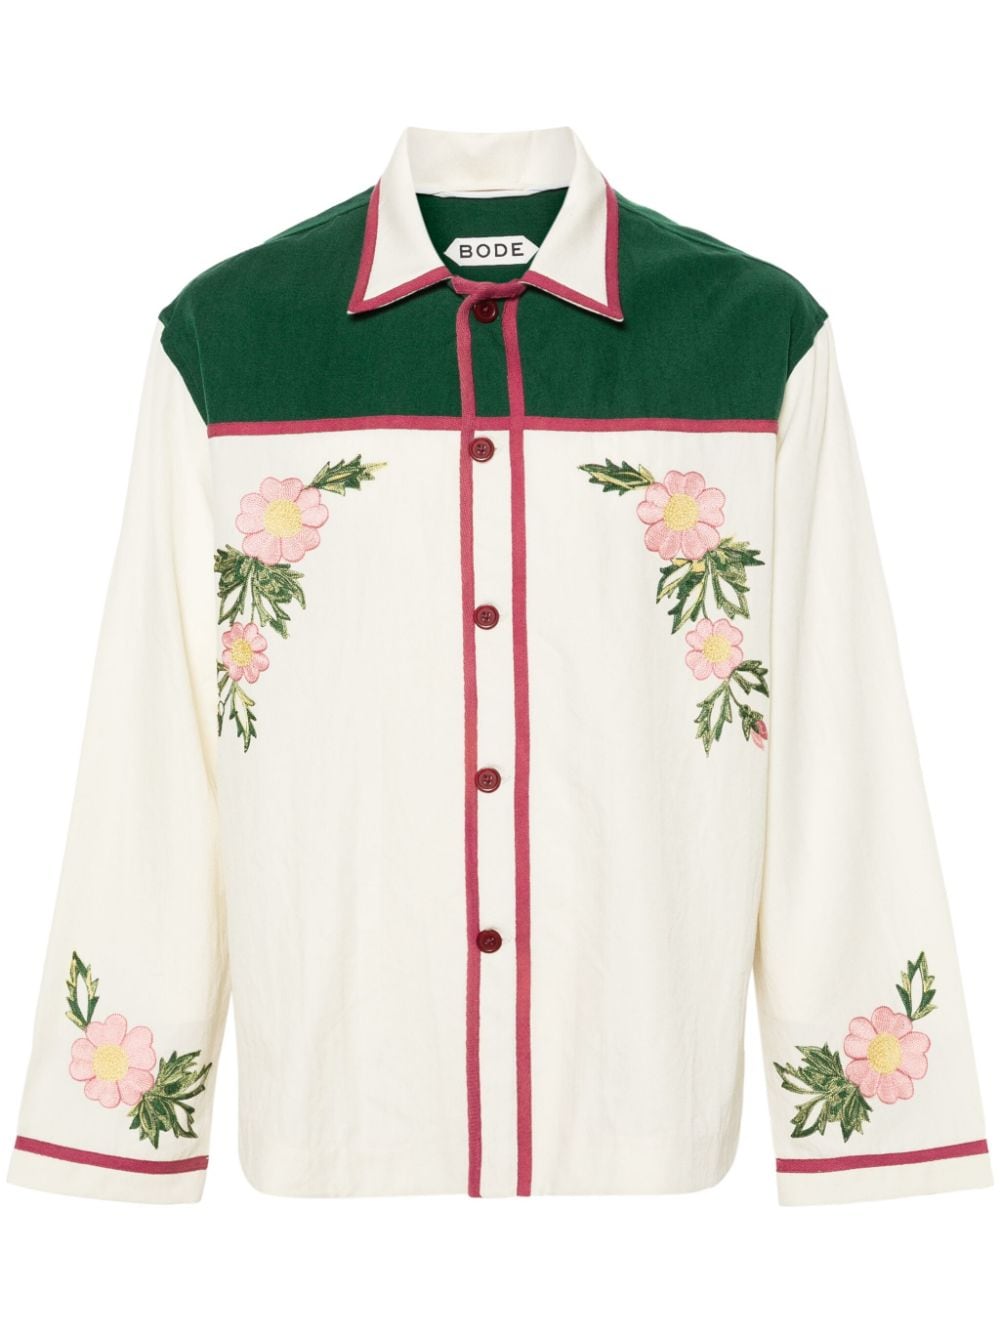 BODE BODE- Embroidered Wool Shirt